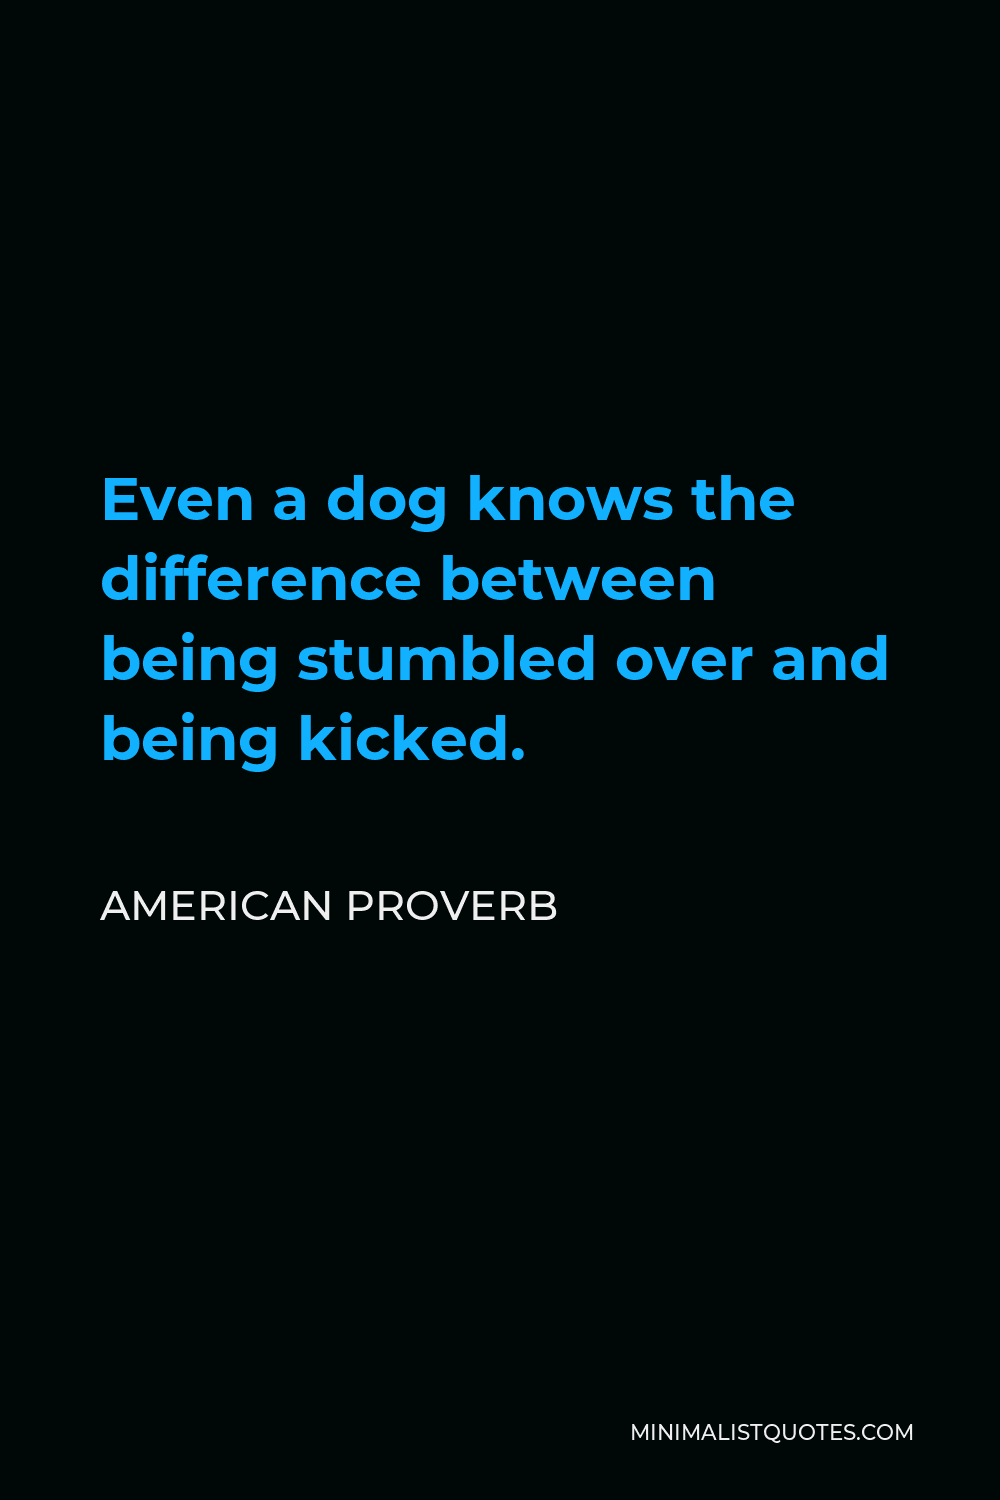 American Proverb Quote - Even a dog knows the difference between being stumbled over and being kicked.